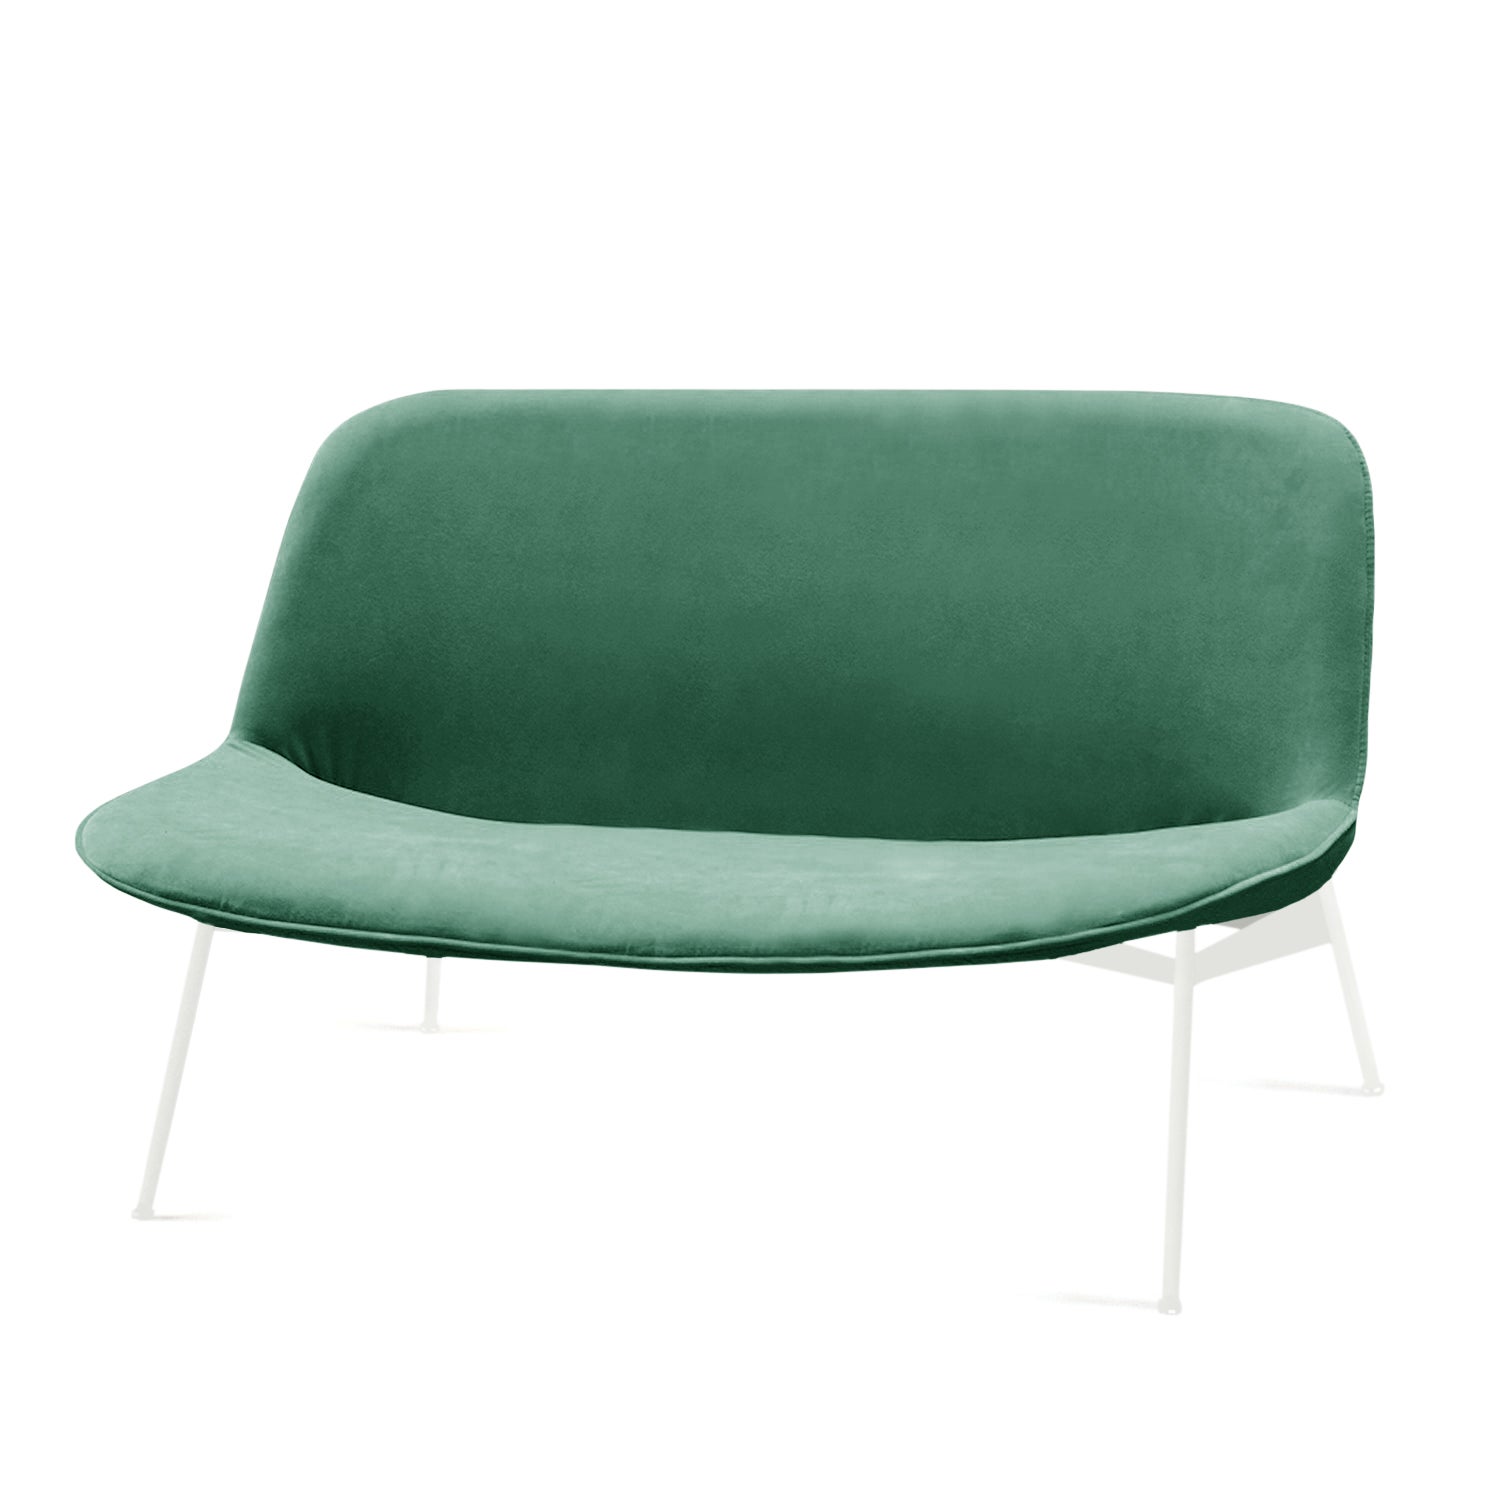 Chiado Sofa, Large with Paris Green and White For Sale